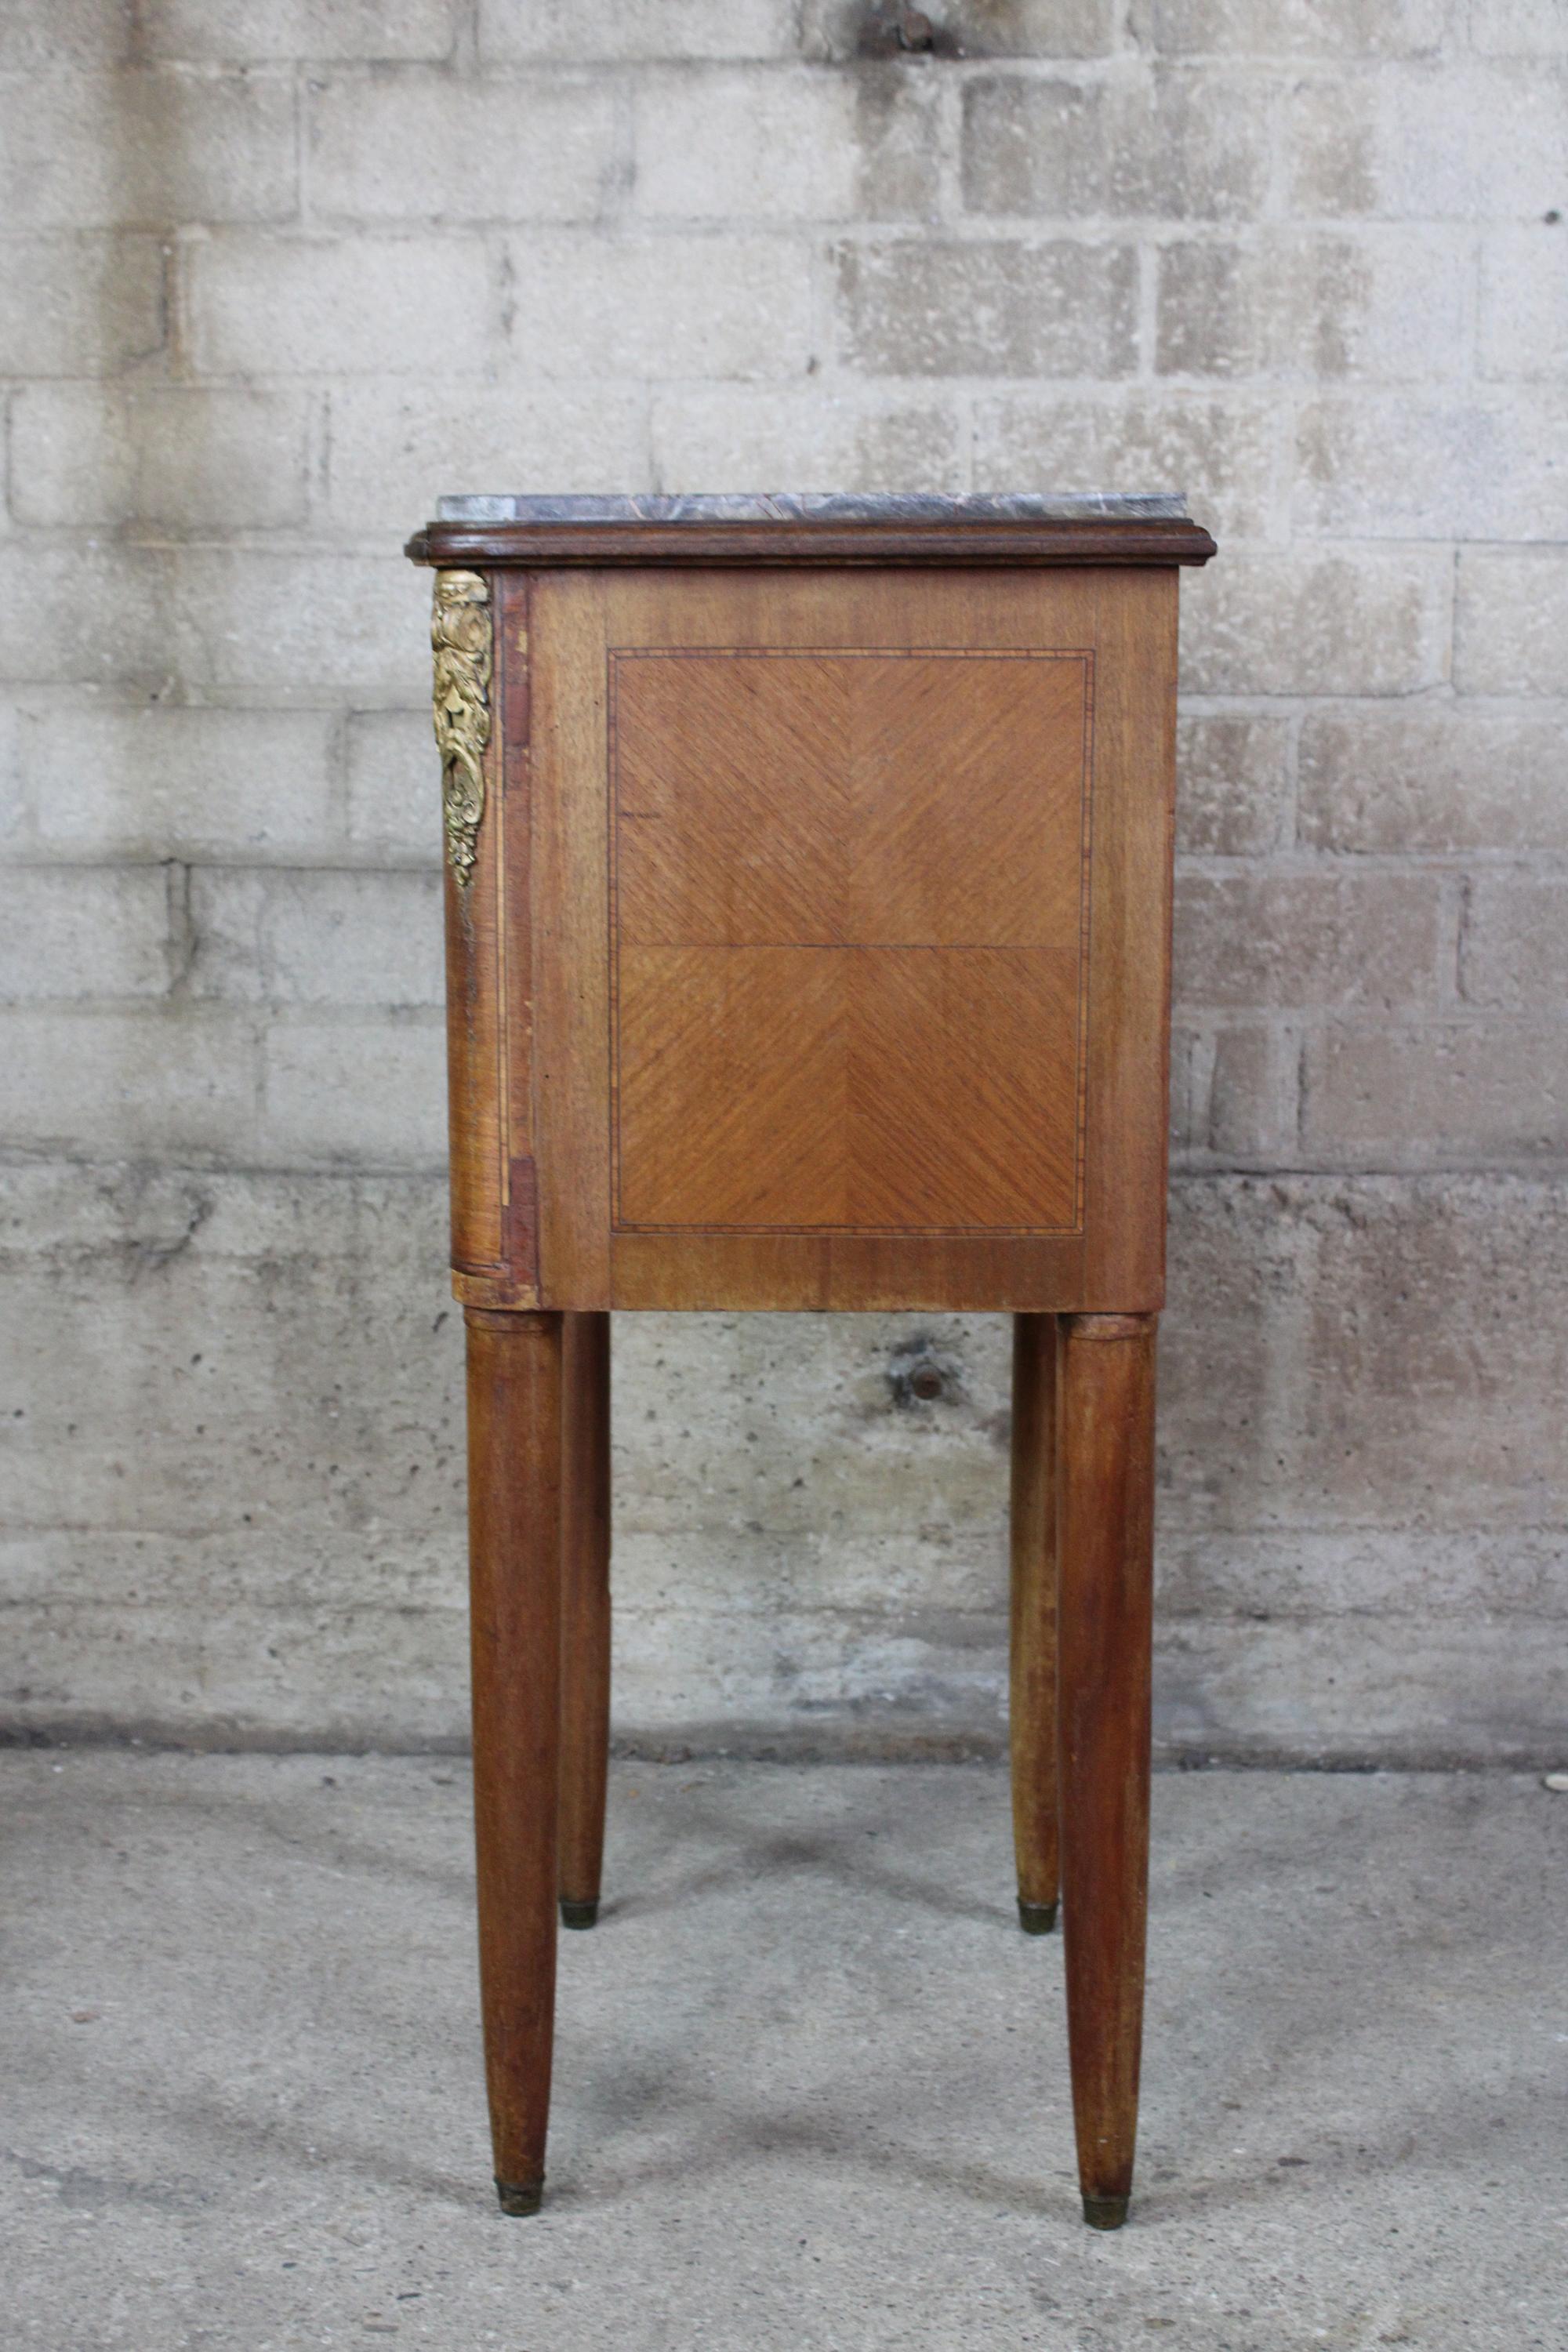 Antique French Walnut Marble Top Tobacco Humidor Stand Cabinet End Table 1